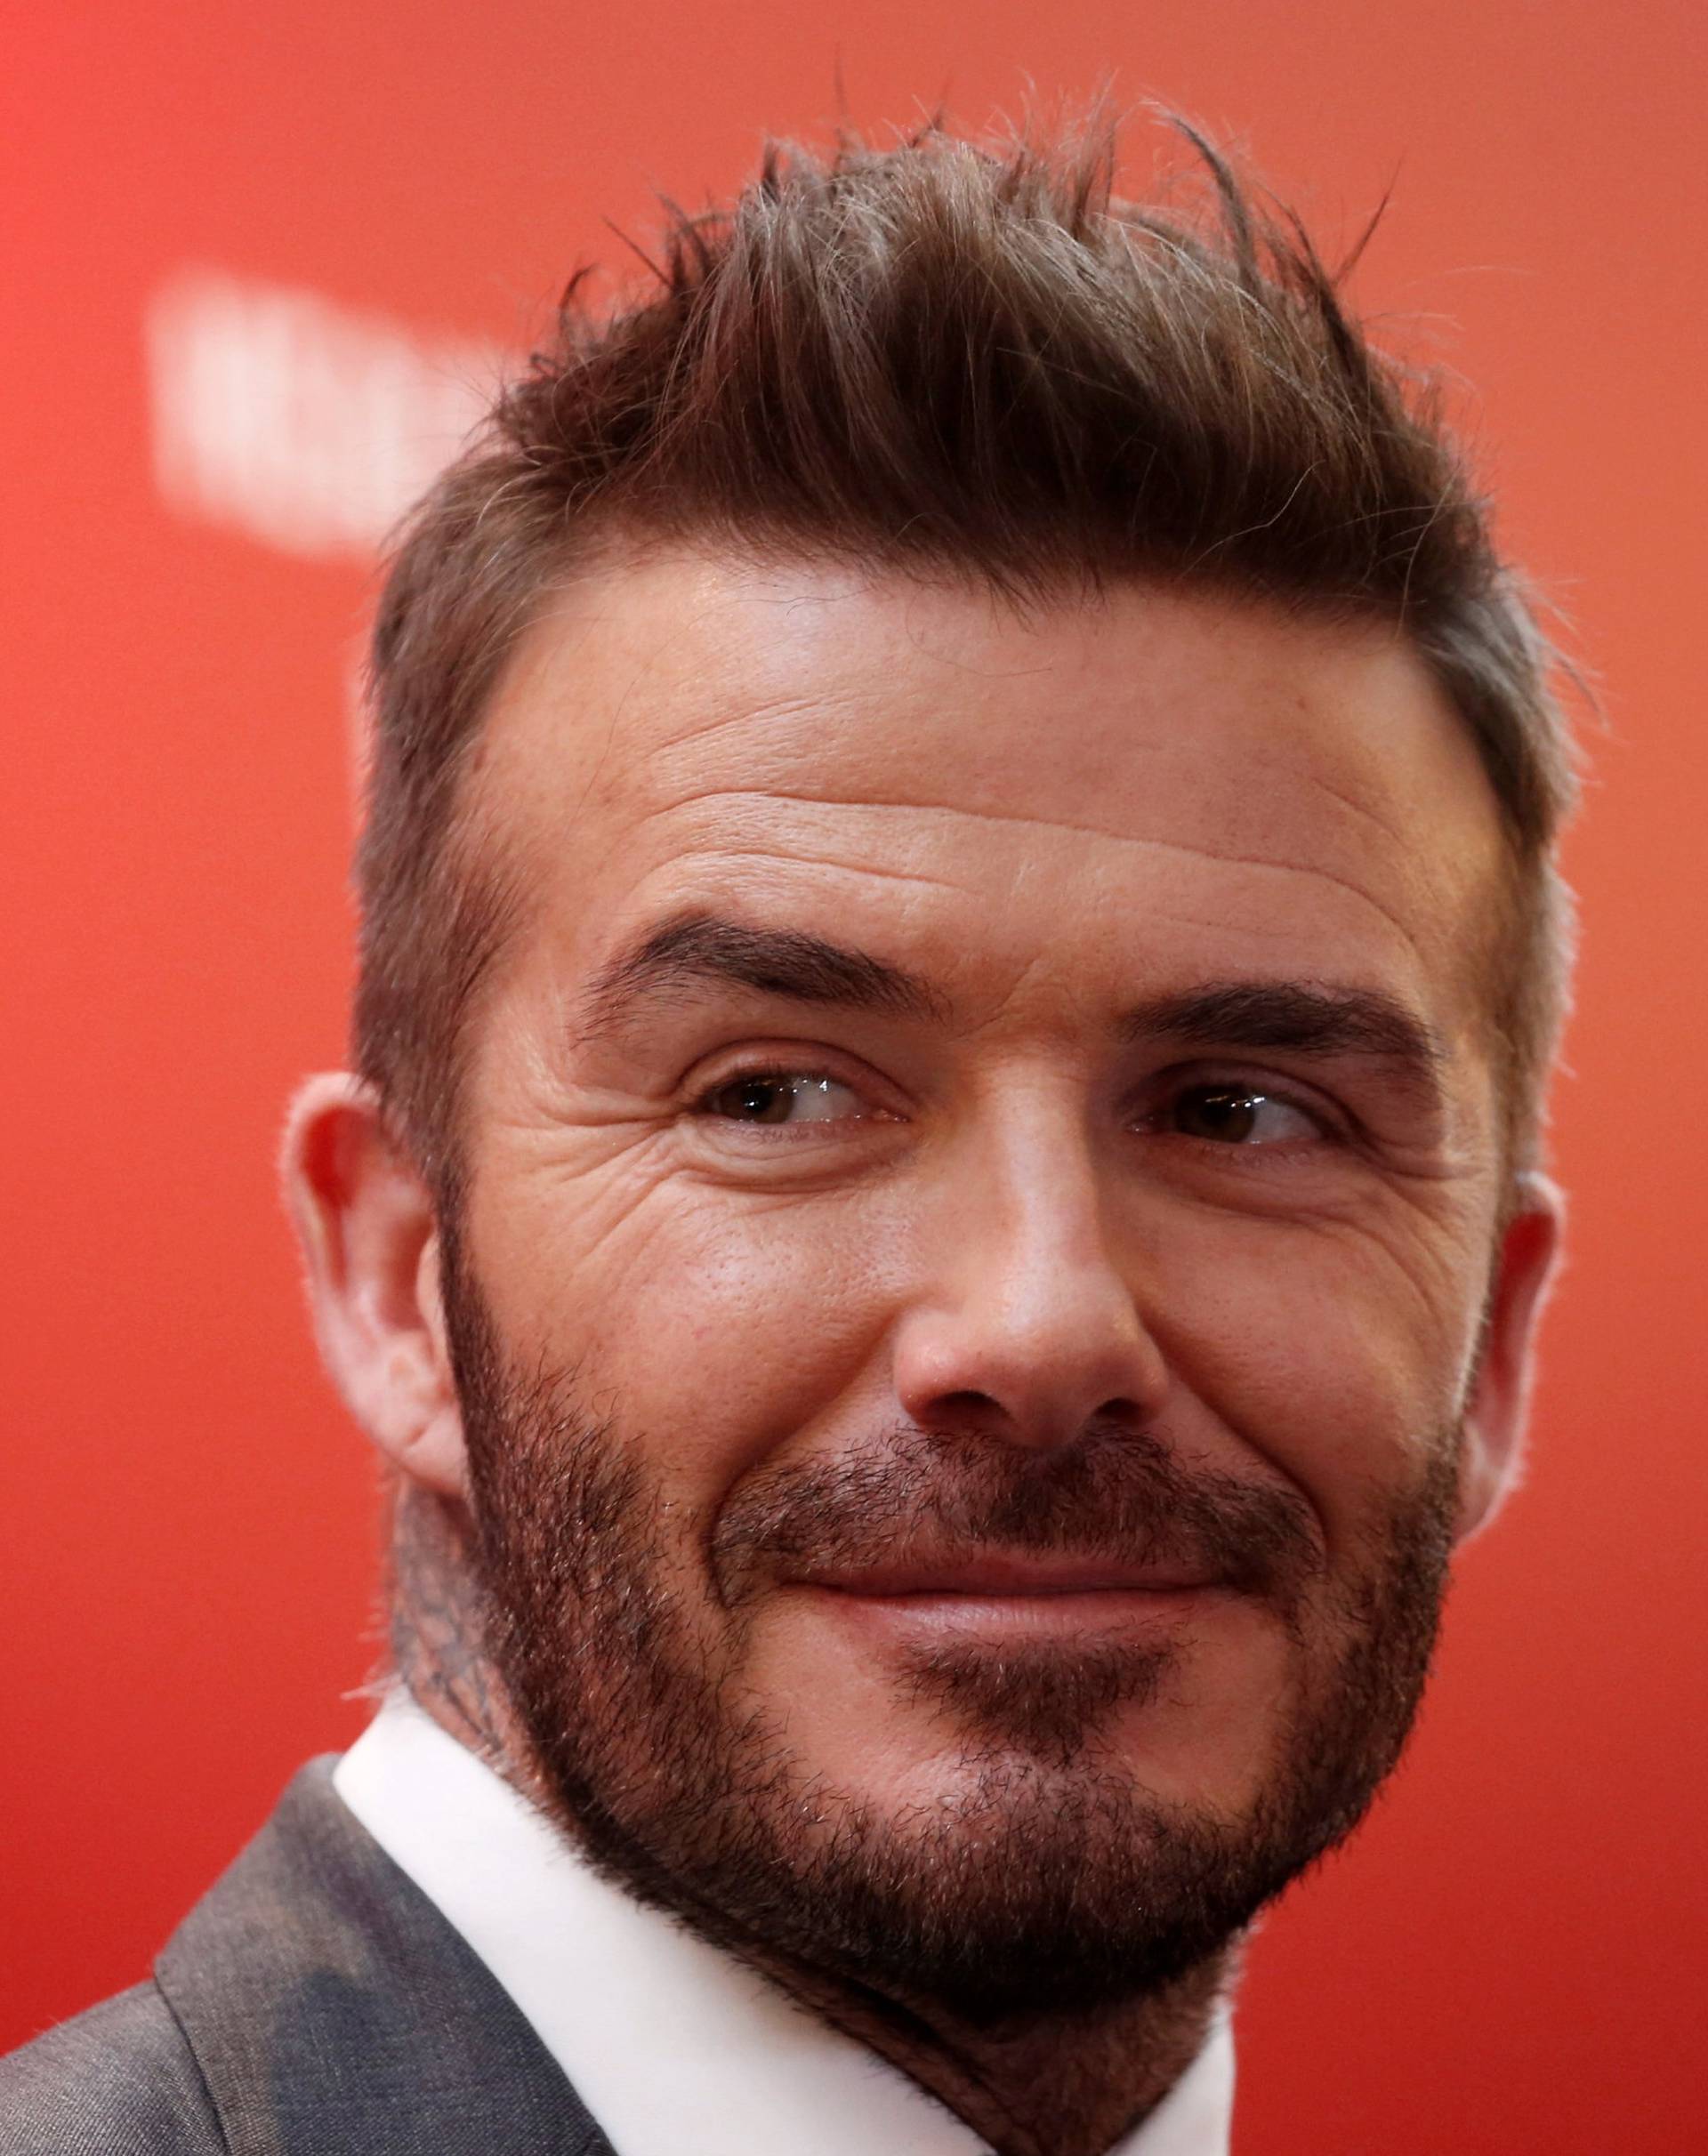 FILE PHOTO: David Beckham attends an insurance company charity event in Jakarta